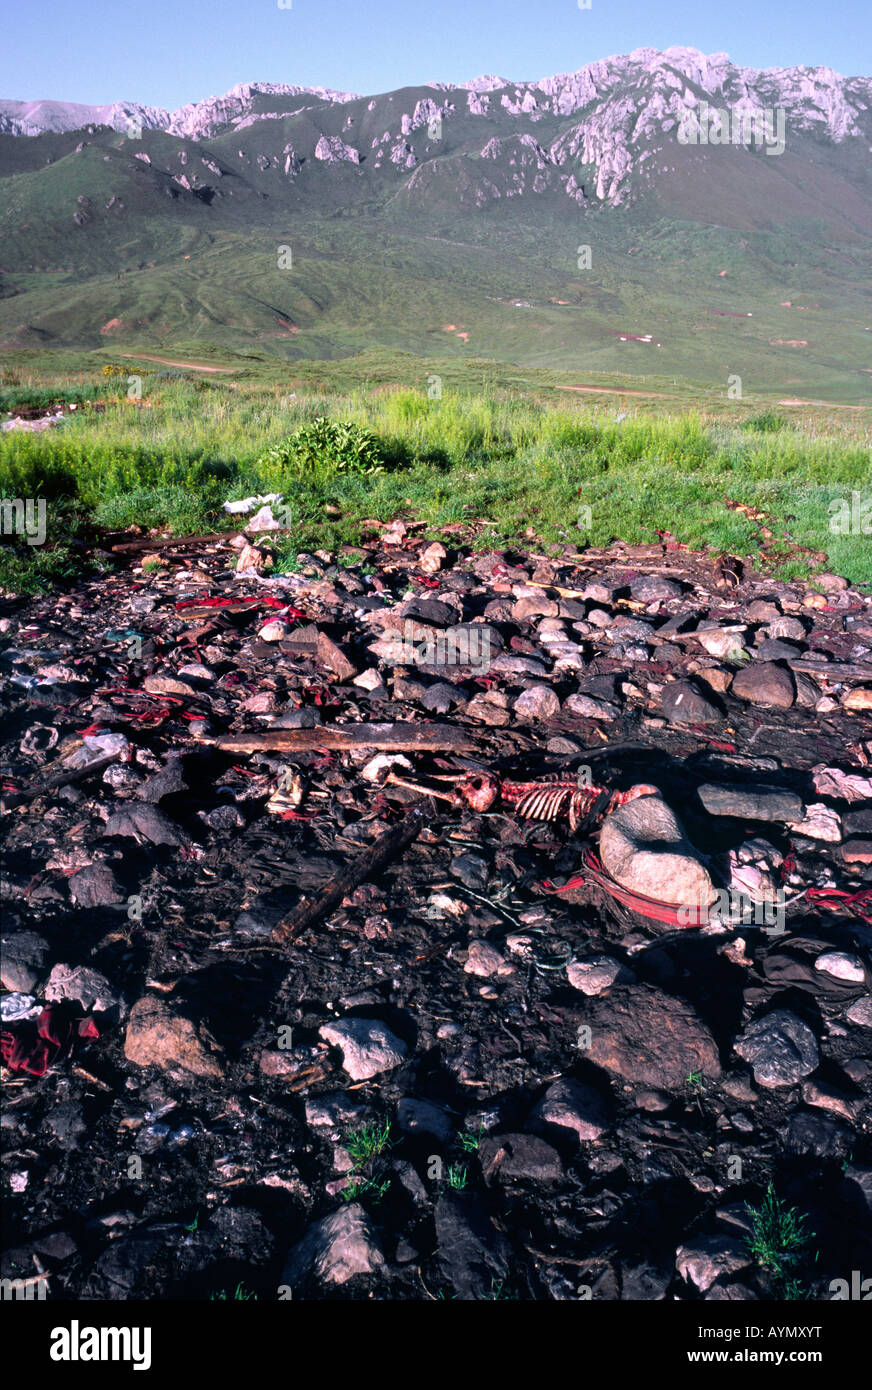 Human remains at a Tibetan sky burial site in the mountains of Langmusi in China's Gansu province. Stock Photo